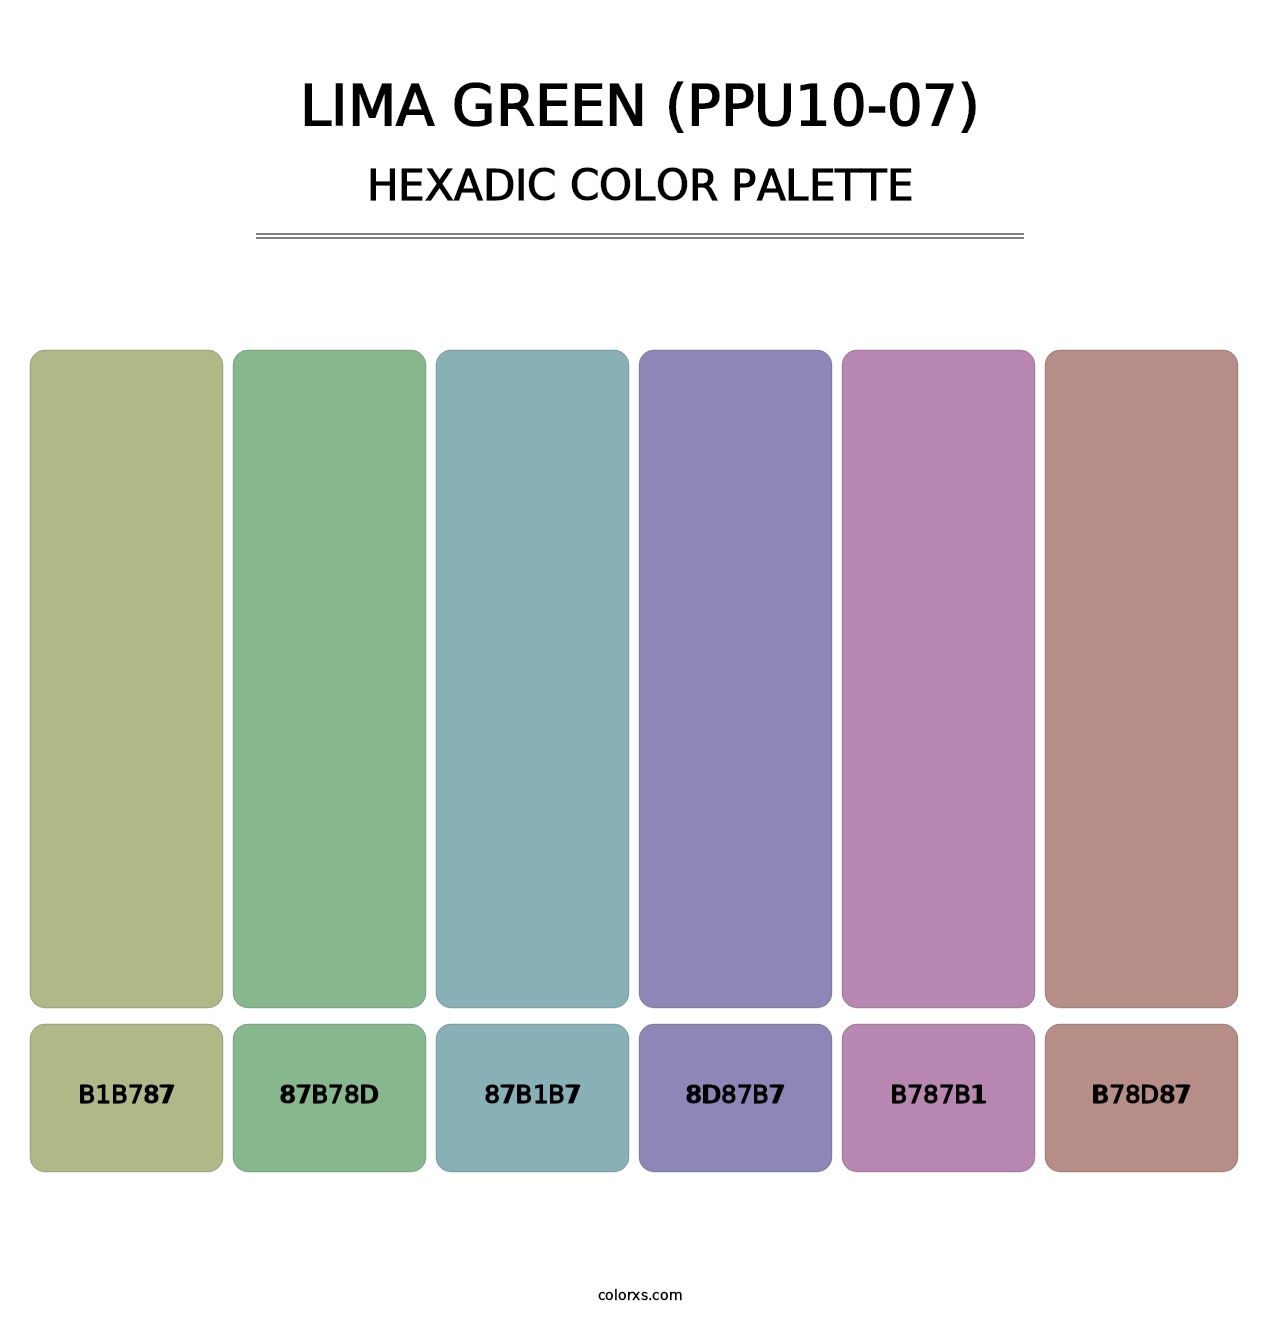 Lima Green (PPU10-07) - Hexadic Color Palette